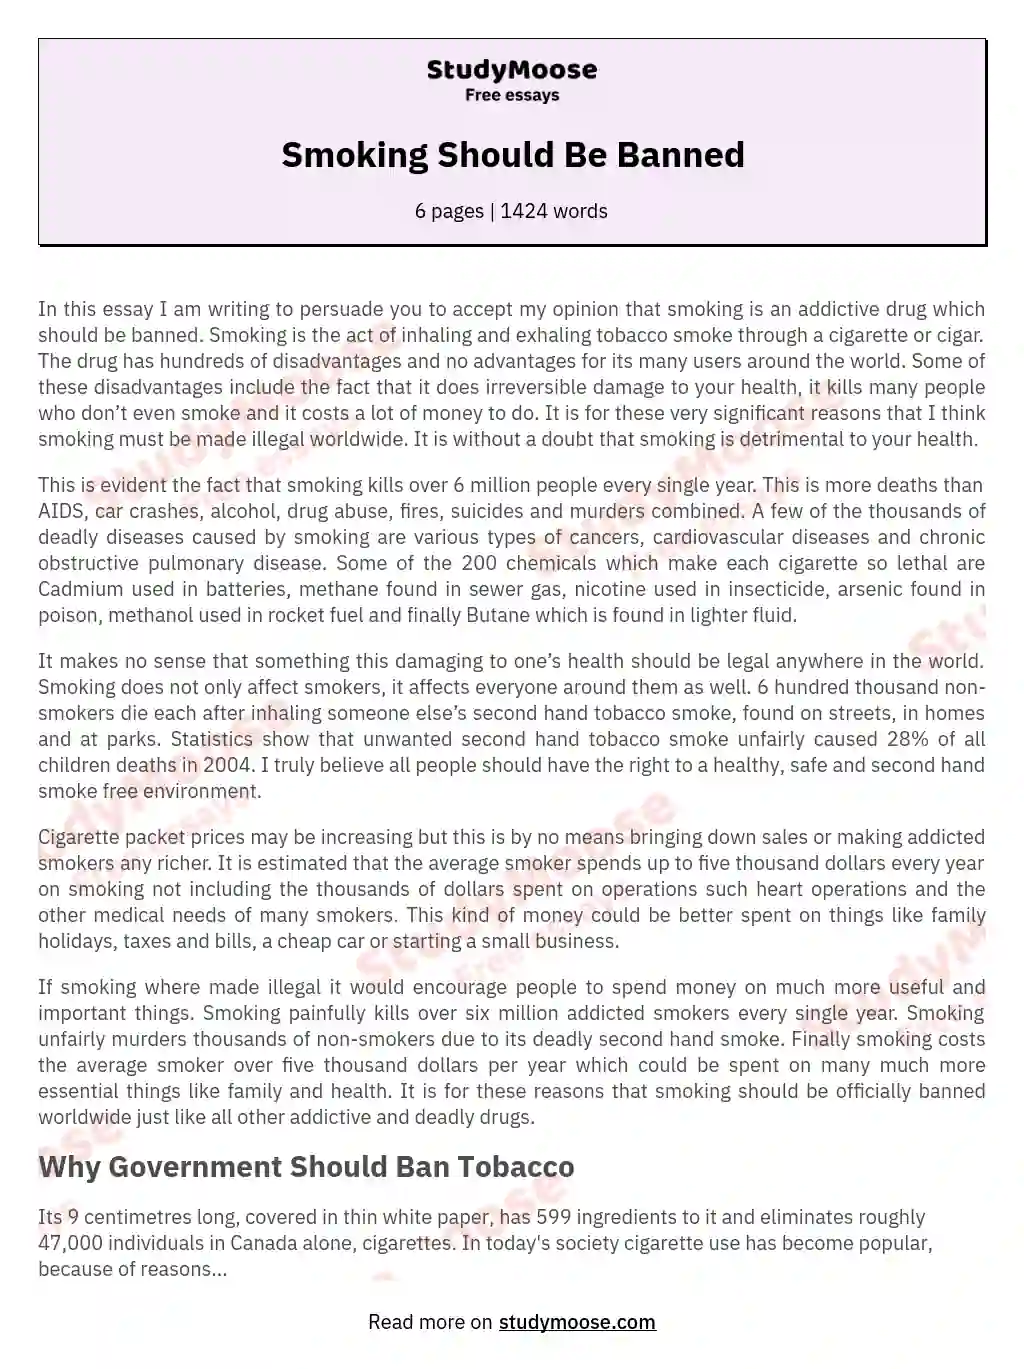 Smoking Should Be Banned essay